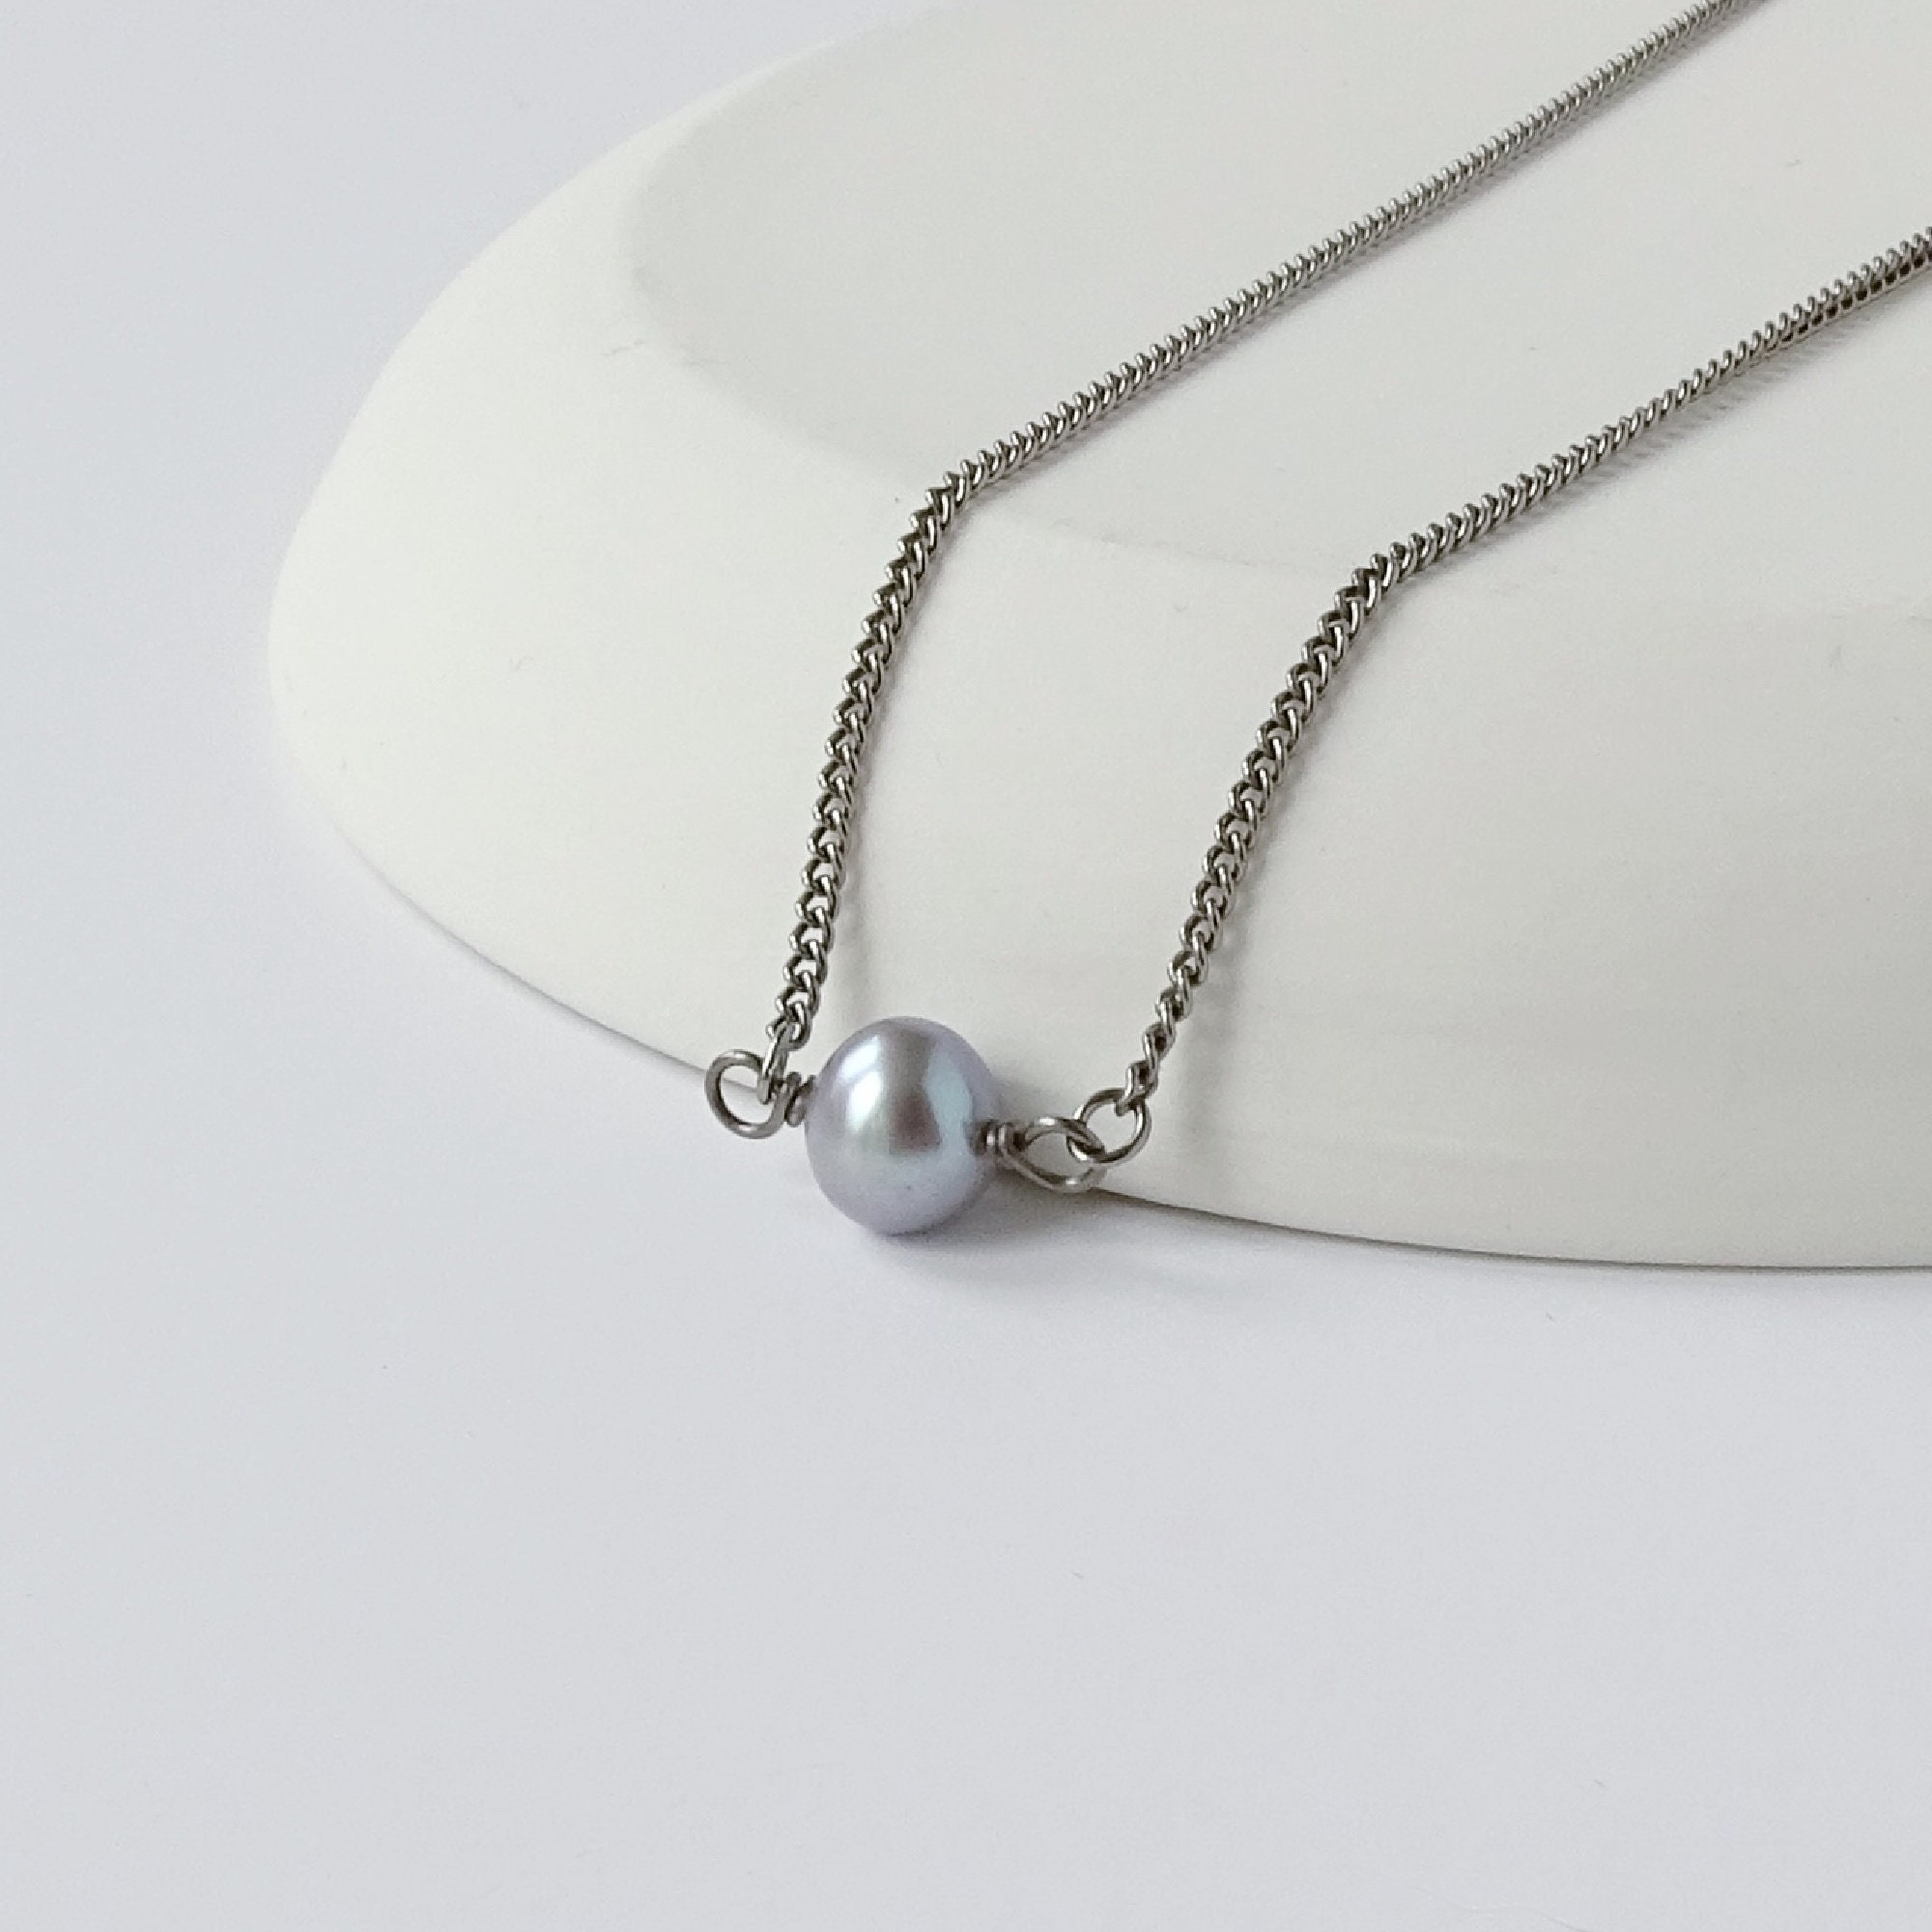 Single Gray Pearl Titanium Necklace, Niobium Wire Wrapped Freshwater Pearl  Necklace, Hypoallergenic Nickel Free Necklace for Sensitive Skin - Etsy